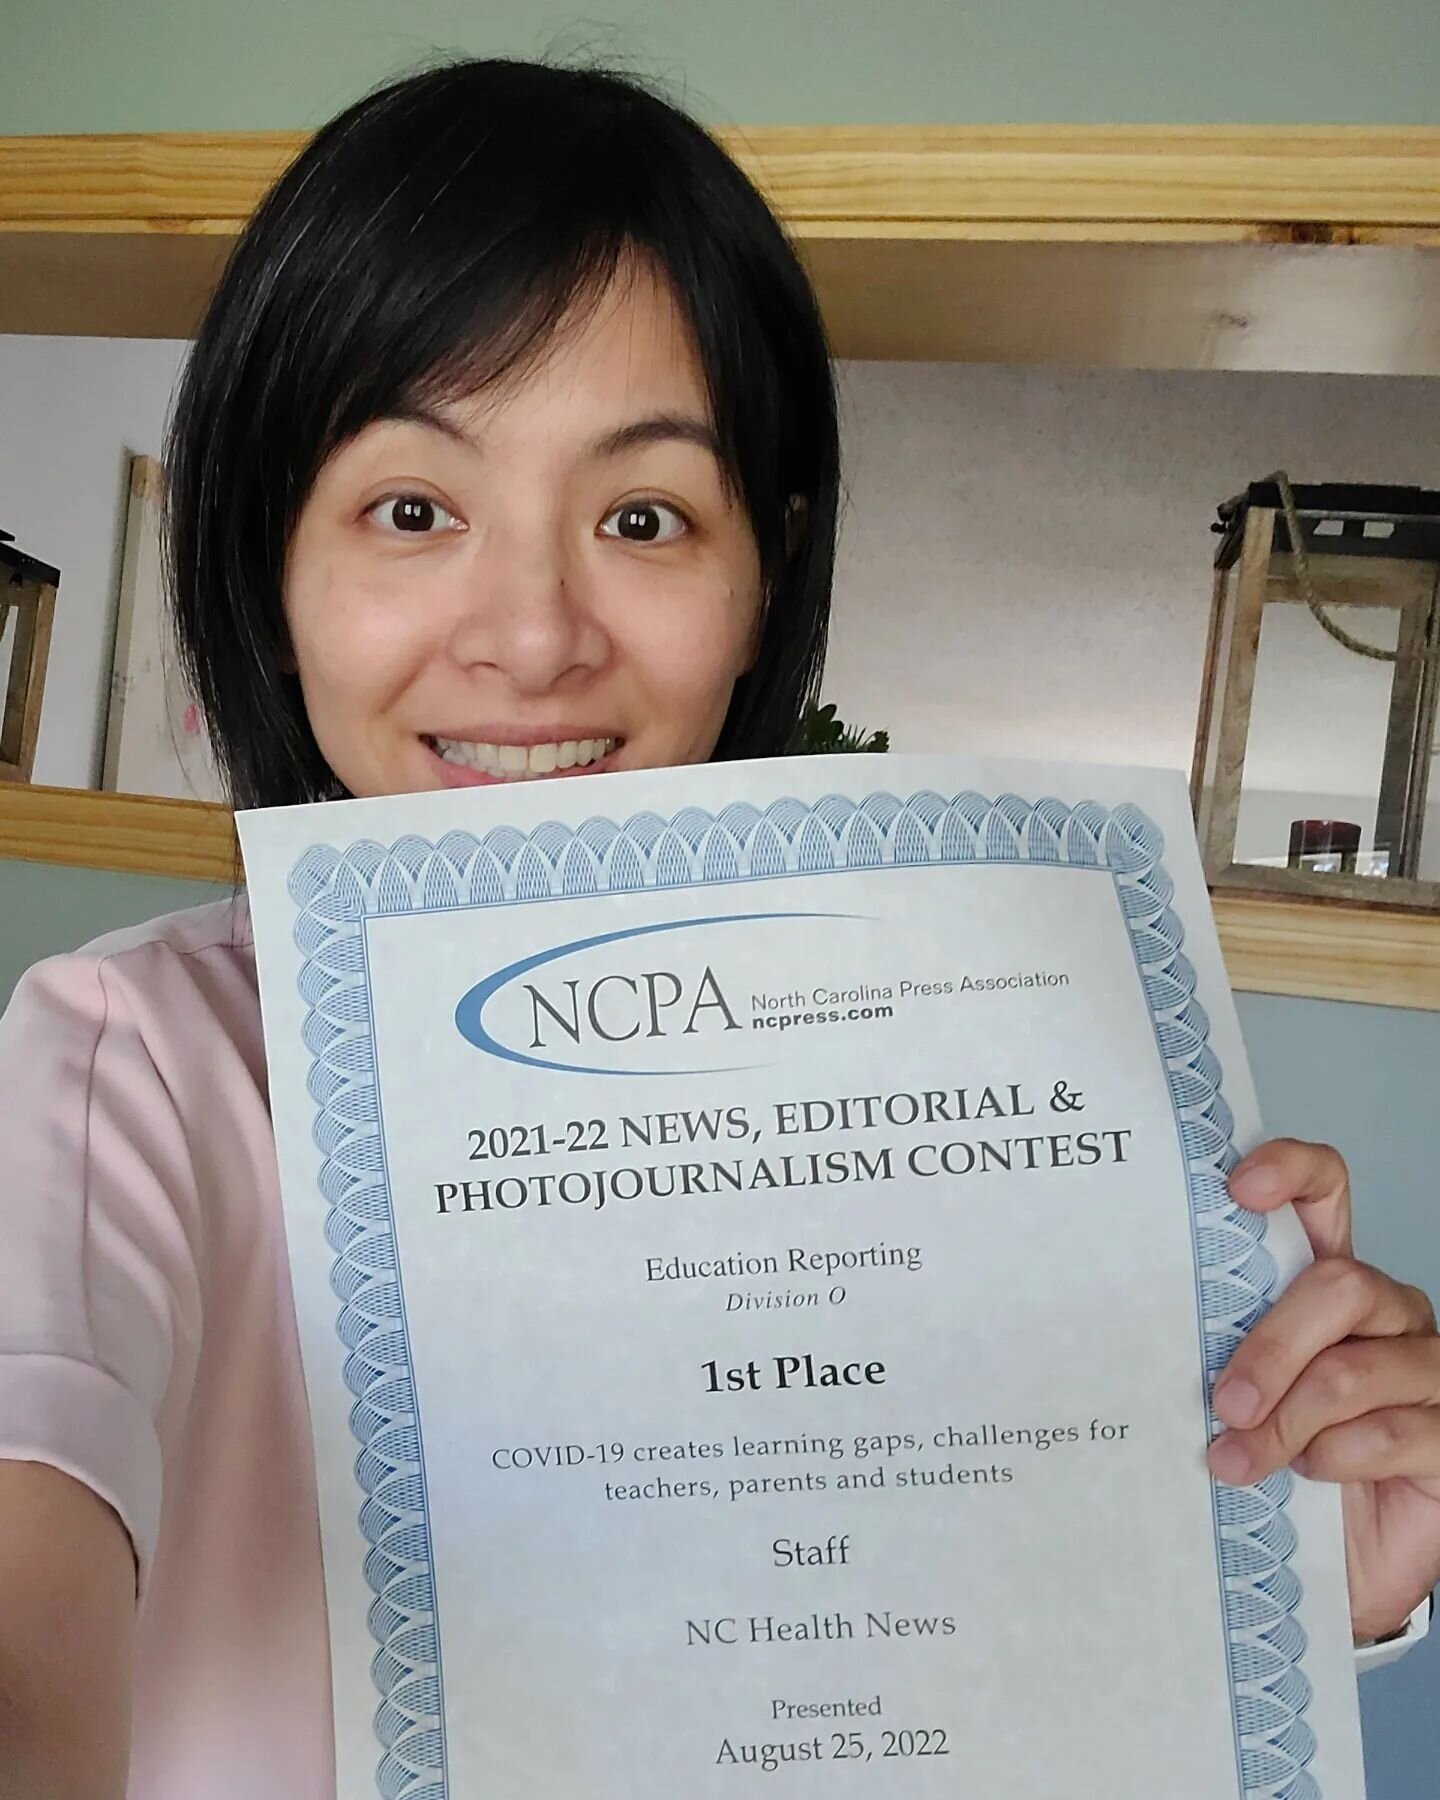 I won a journalism prize...!?

One of my stories won a team prize when I part-time interned last year. It's my very first published story so I'm surprised!

Amid dissertation writing &amp; PhD defense, husband's dissertation writing &amp; his PhD def